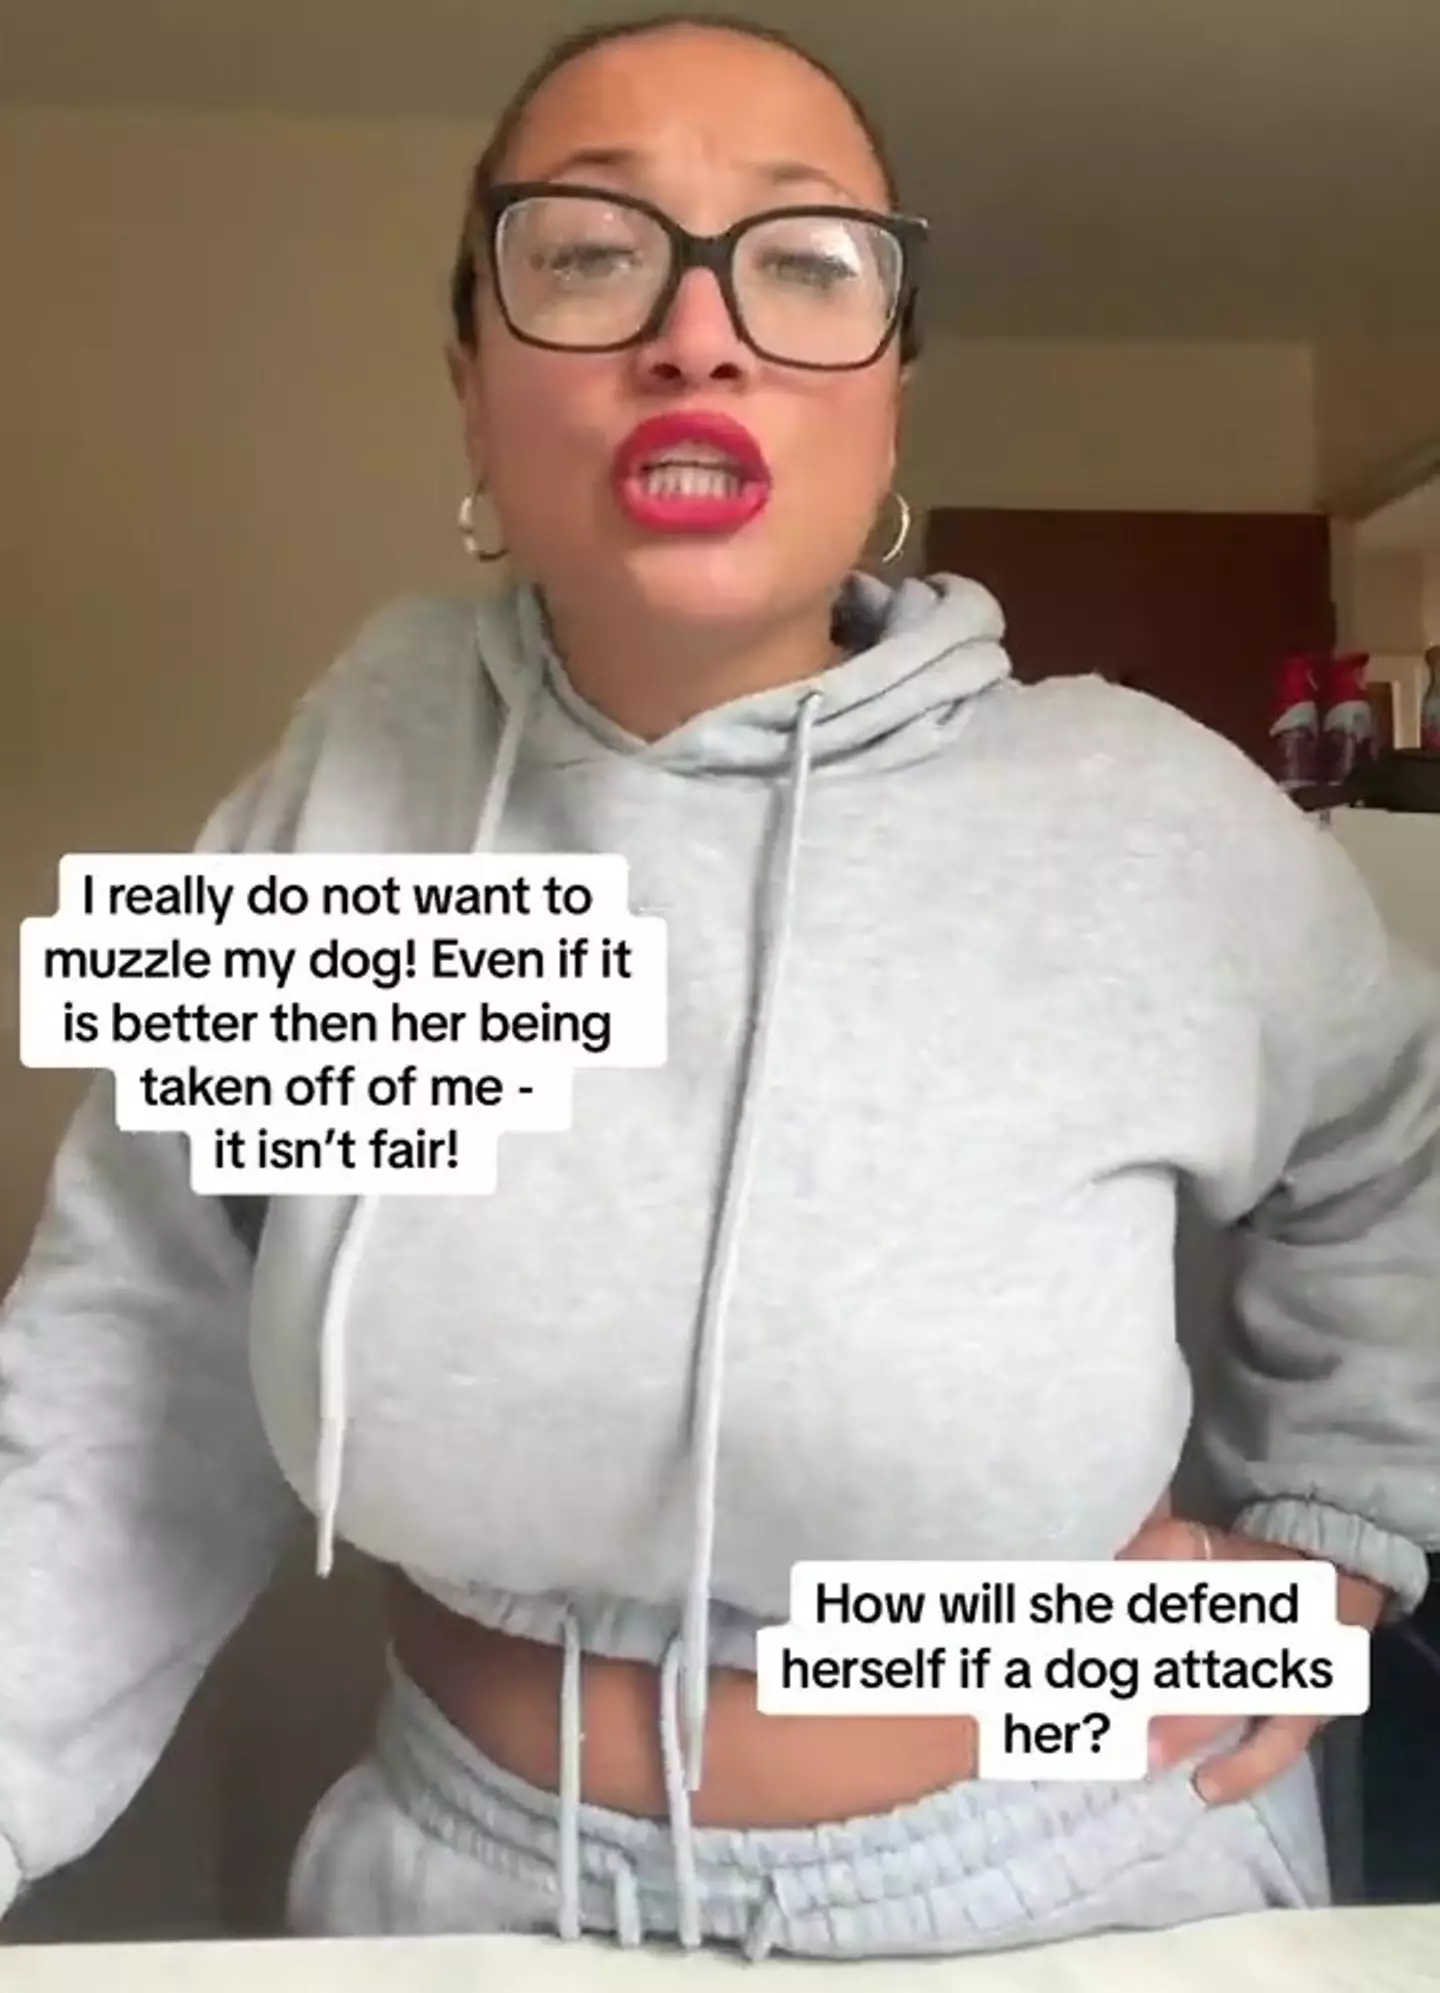 XL bully dog owner Daniella took to TikTok to share her thoughts on muzzling her pet.